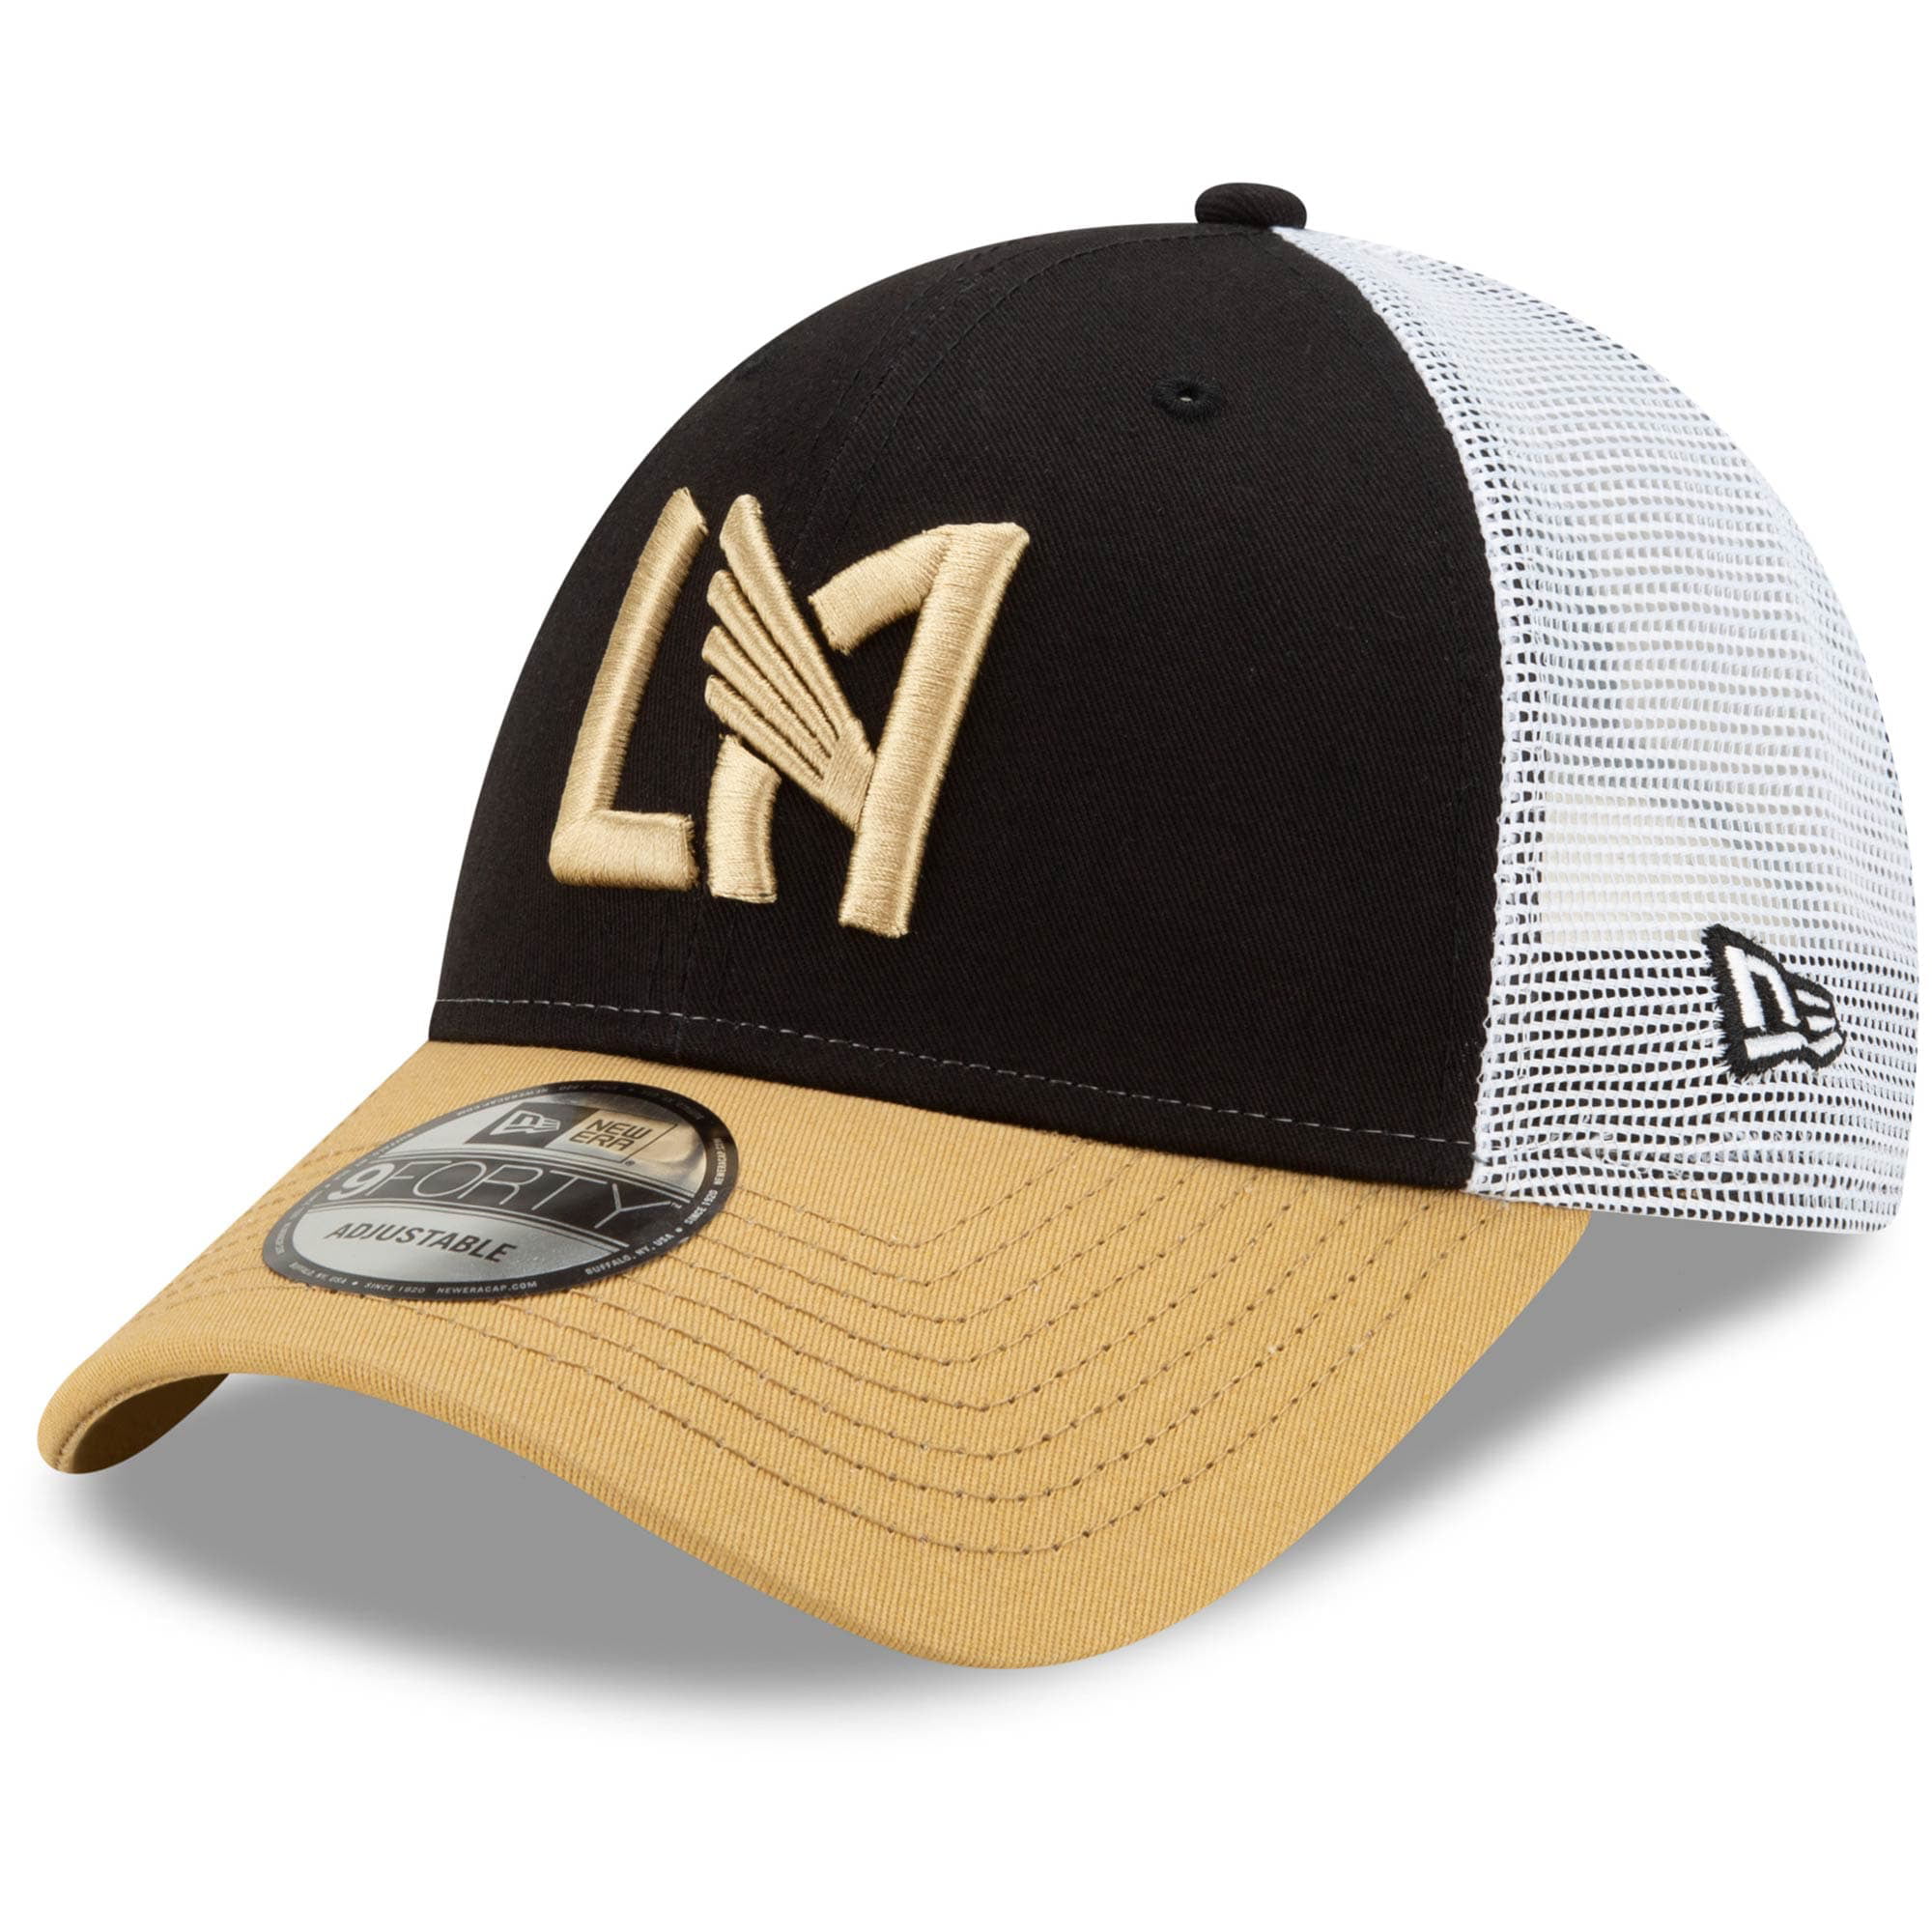 Soccer hat Embroidered 3D Puff Los Angeles LAFC inspired DisneyLA LAFC